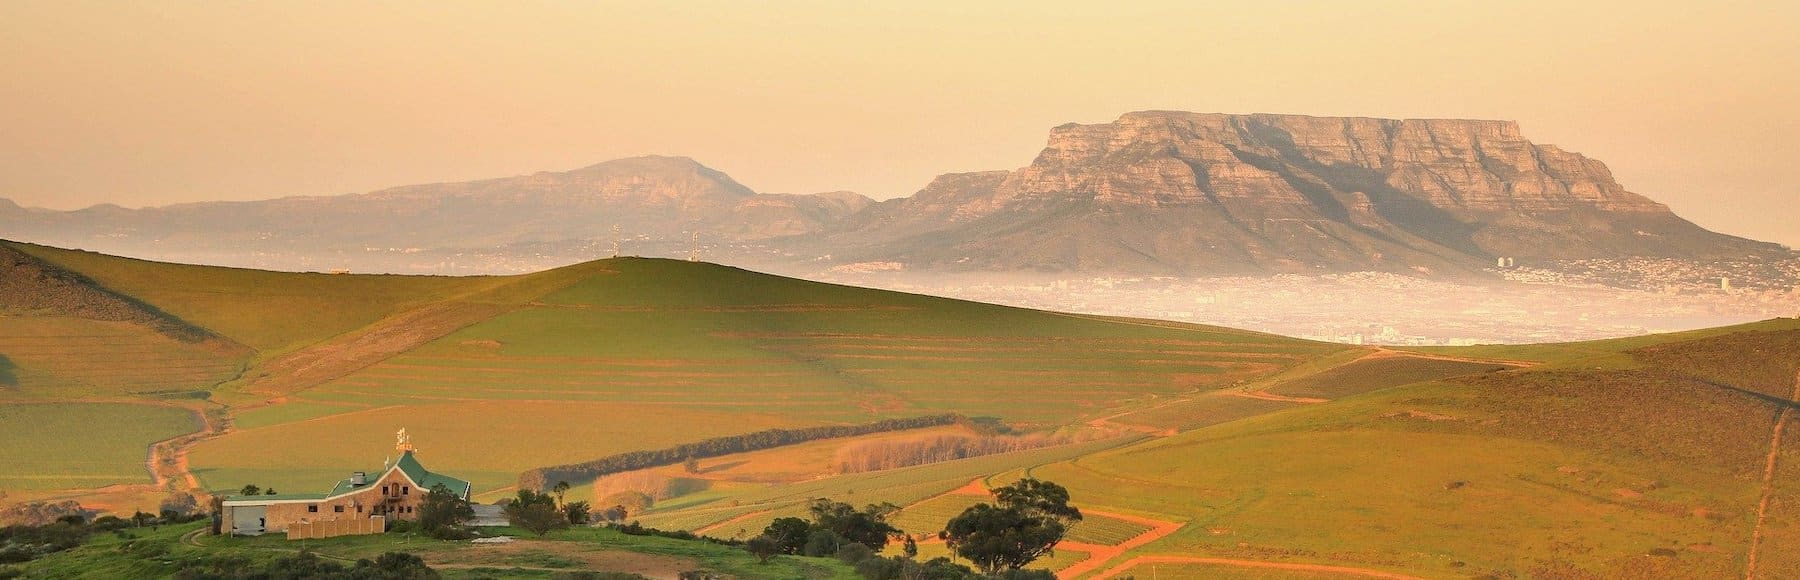 A Guide to Doing a Meaningful Internship in South Africa